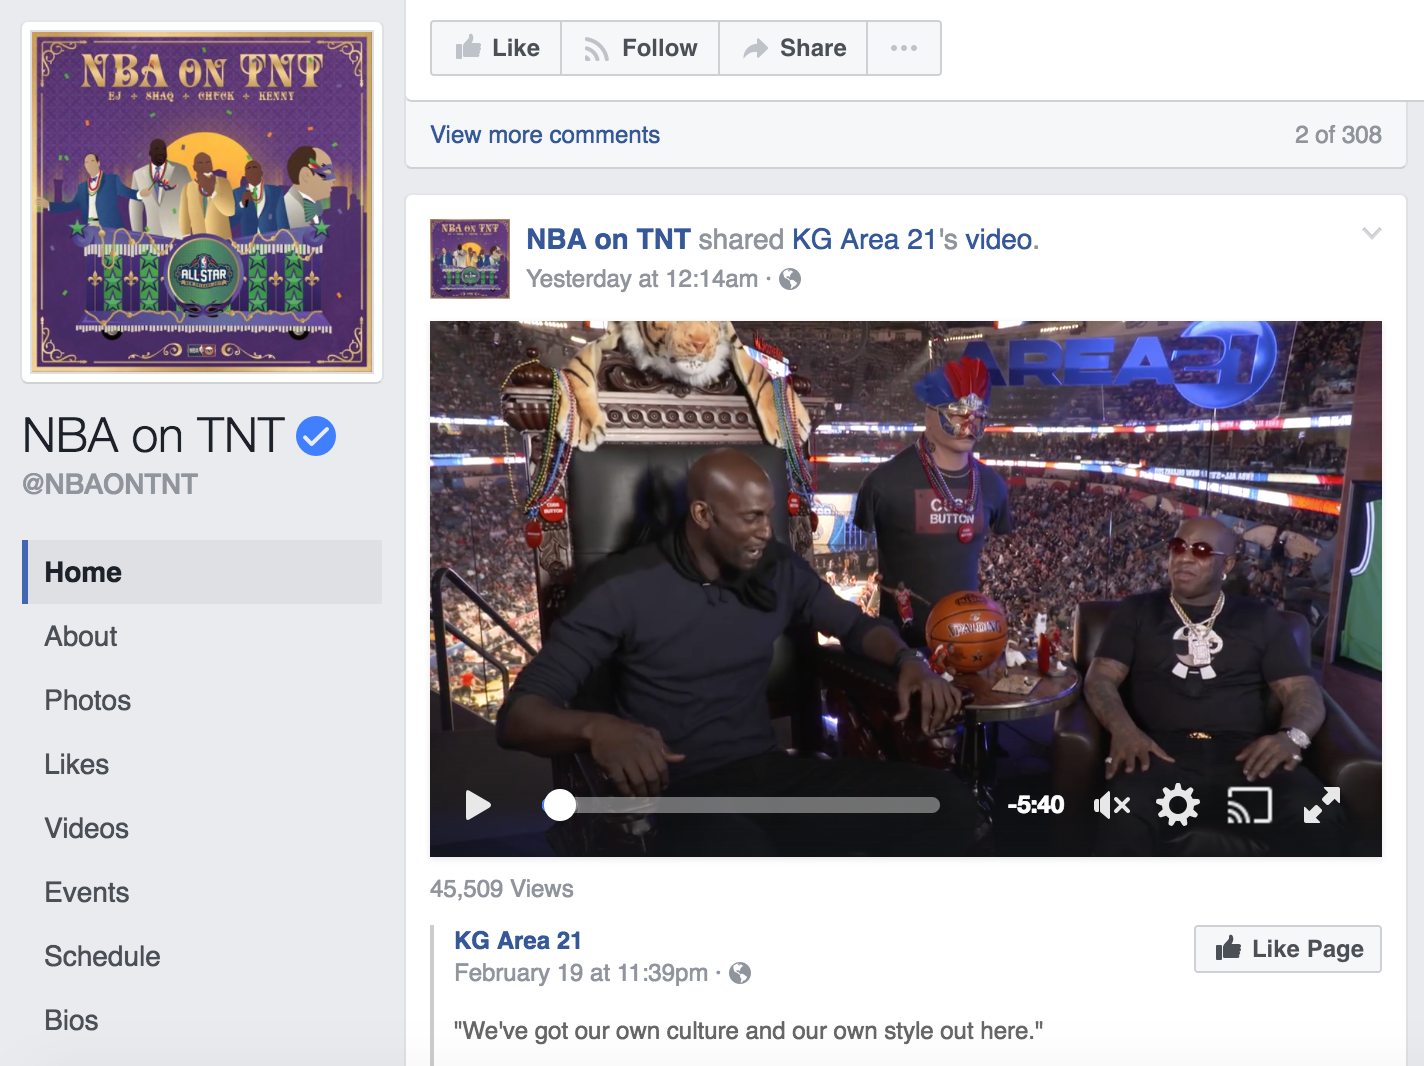 Turner Sports created a small studio area called Area 21 that was a home to some live social video content. Kevin Garnett hosted a Facebook Live from the location during the Slam Dunk Contest. The show was meant to serve as a second-screen complement to the linear television production.